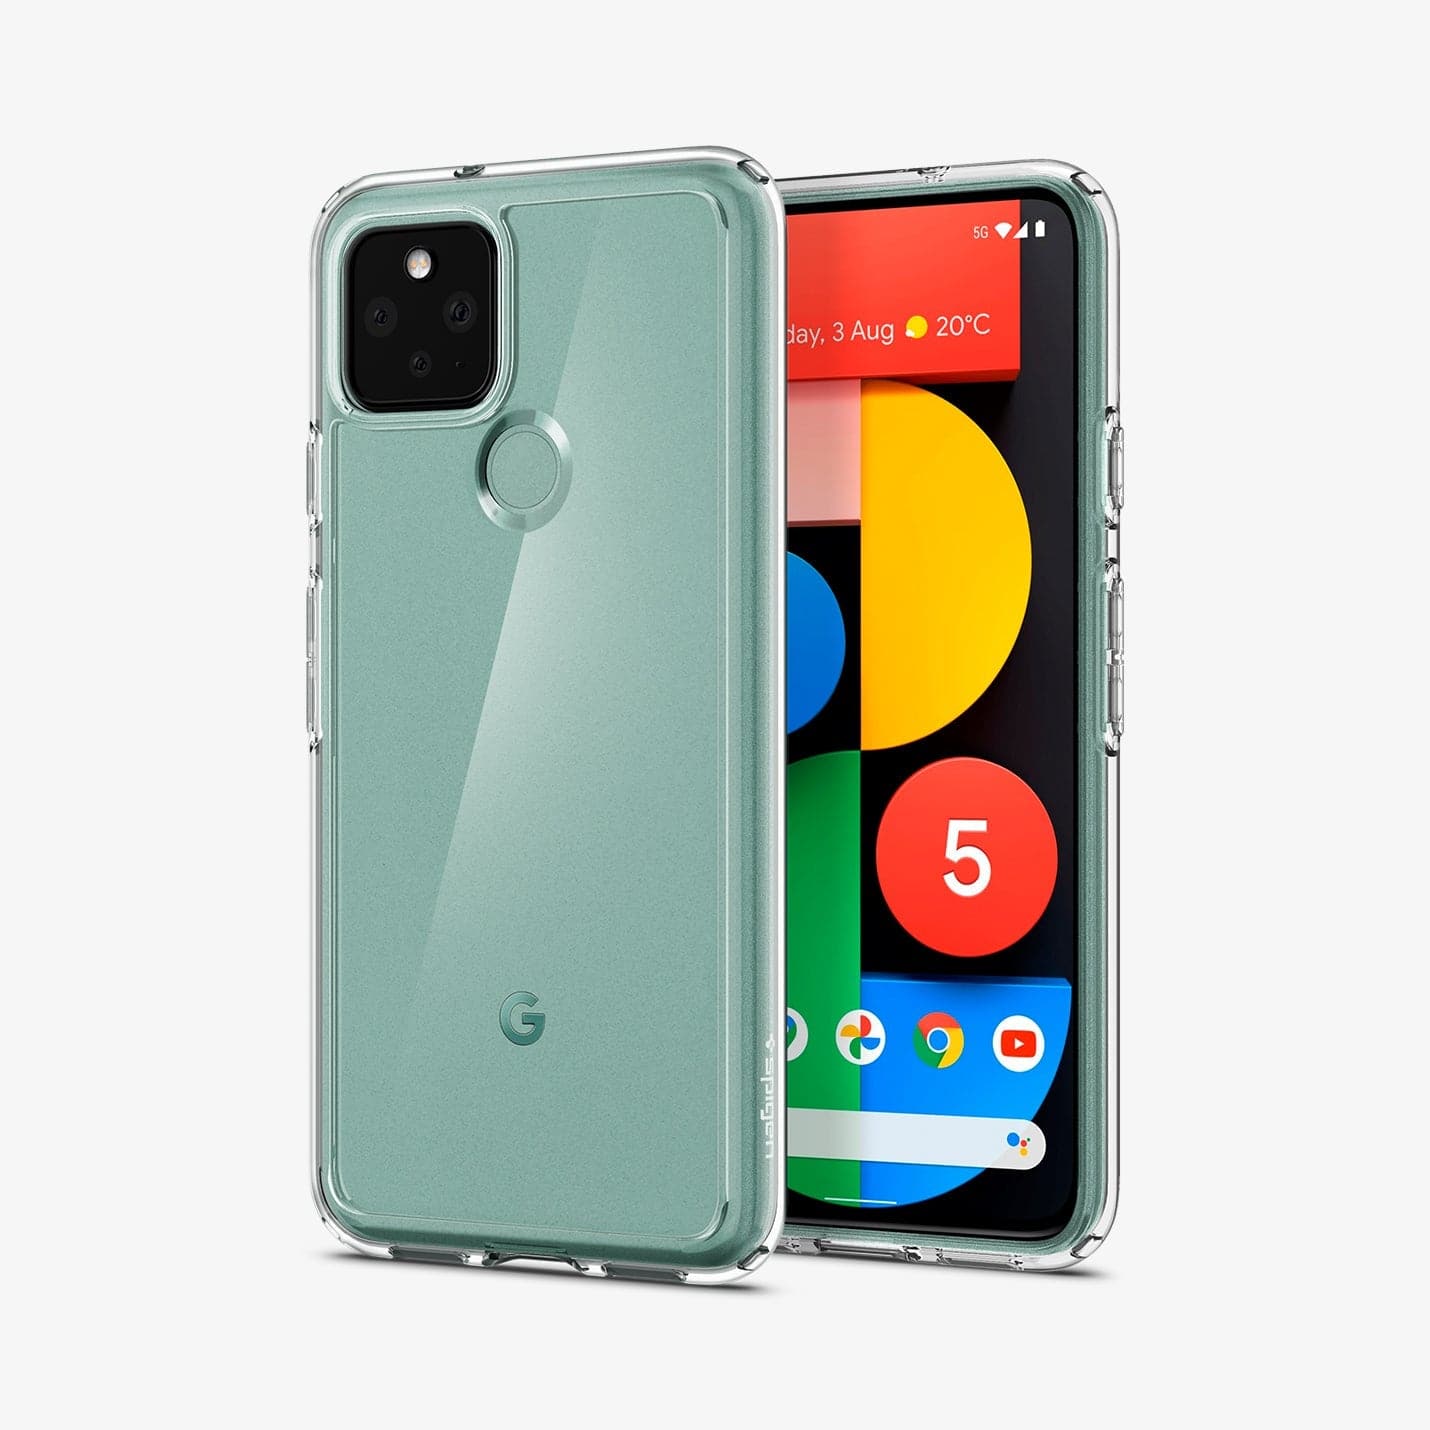 ACS01897 - Pixel 5 Case Ultra Hybrid in crystal clear showing the back and front